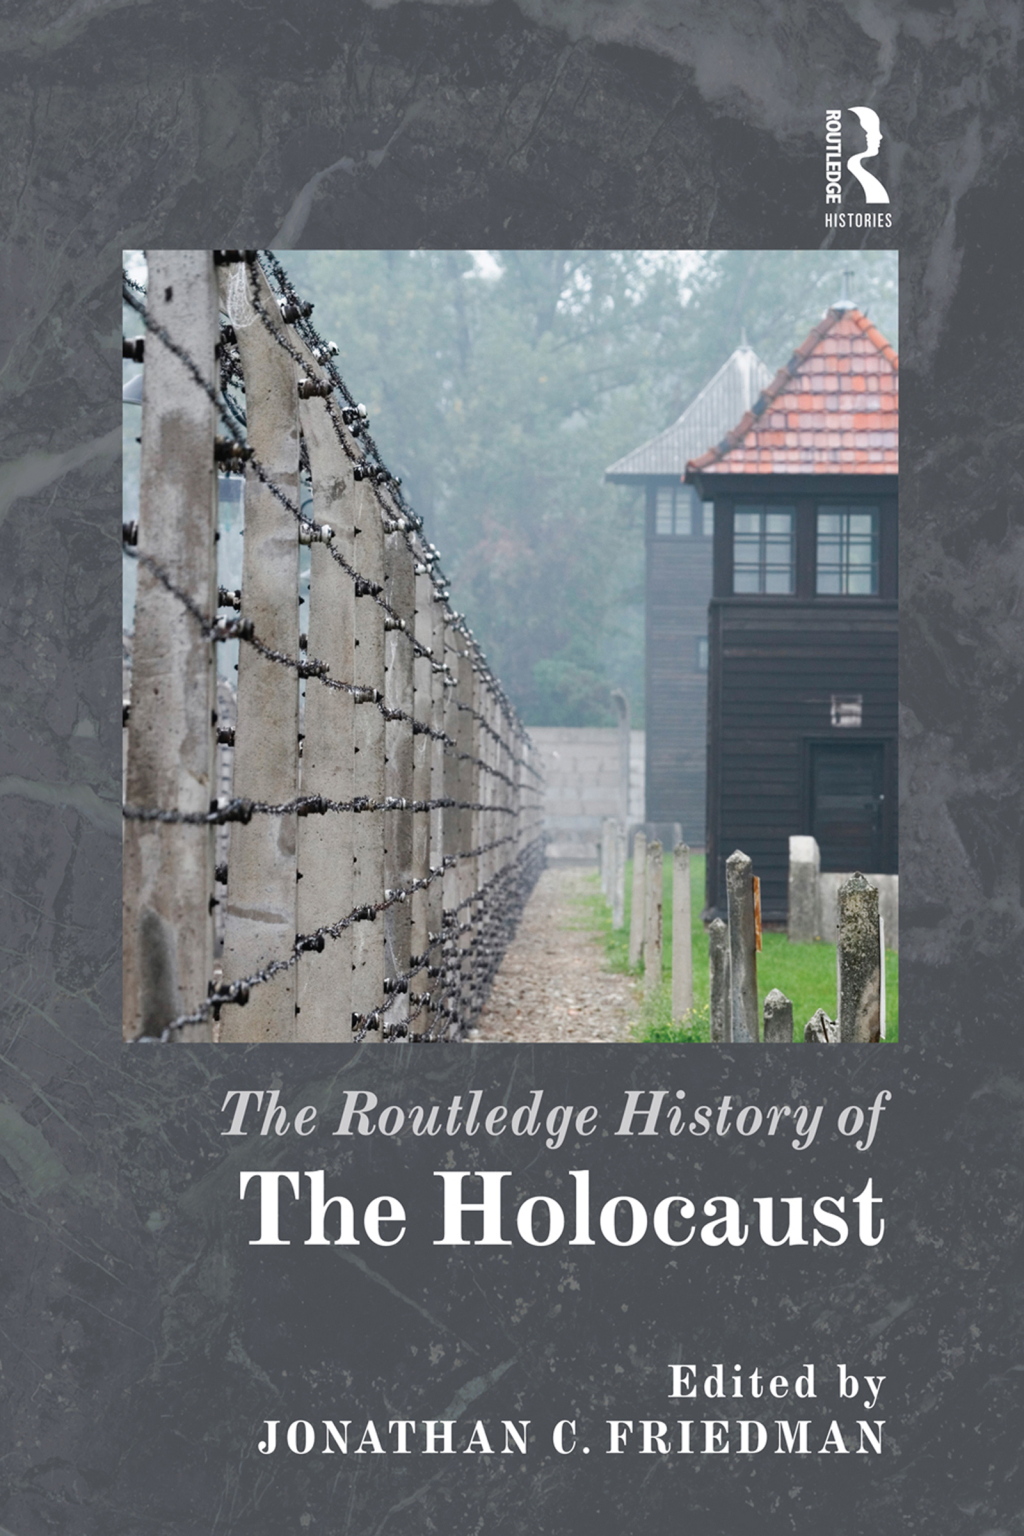 The Routledge History of the Holocaust (eBook) - Jonathan C. Friedman